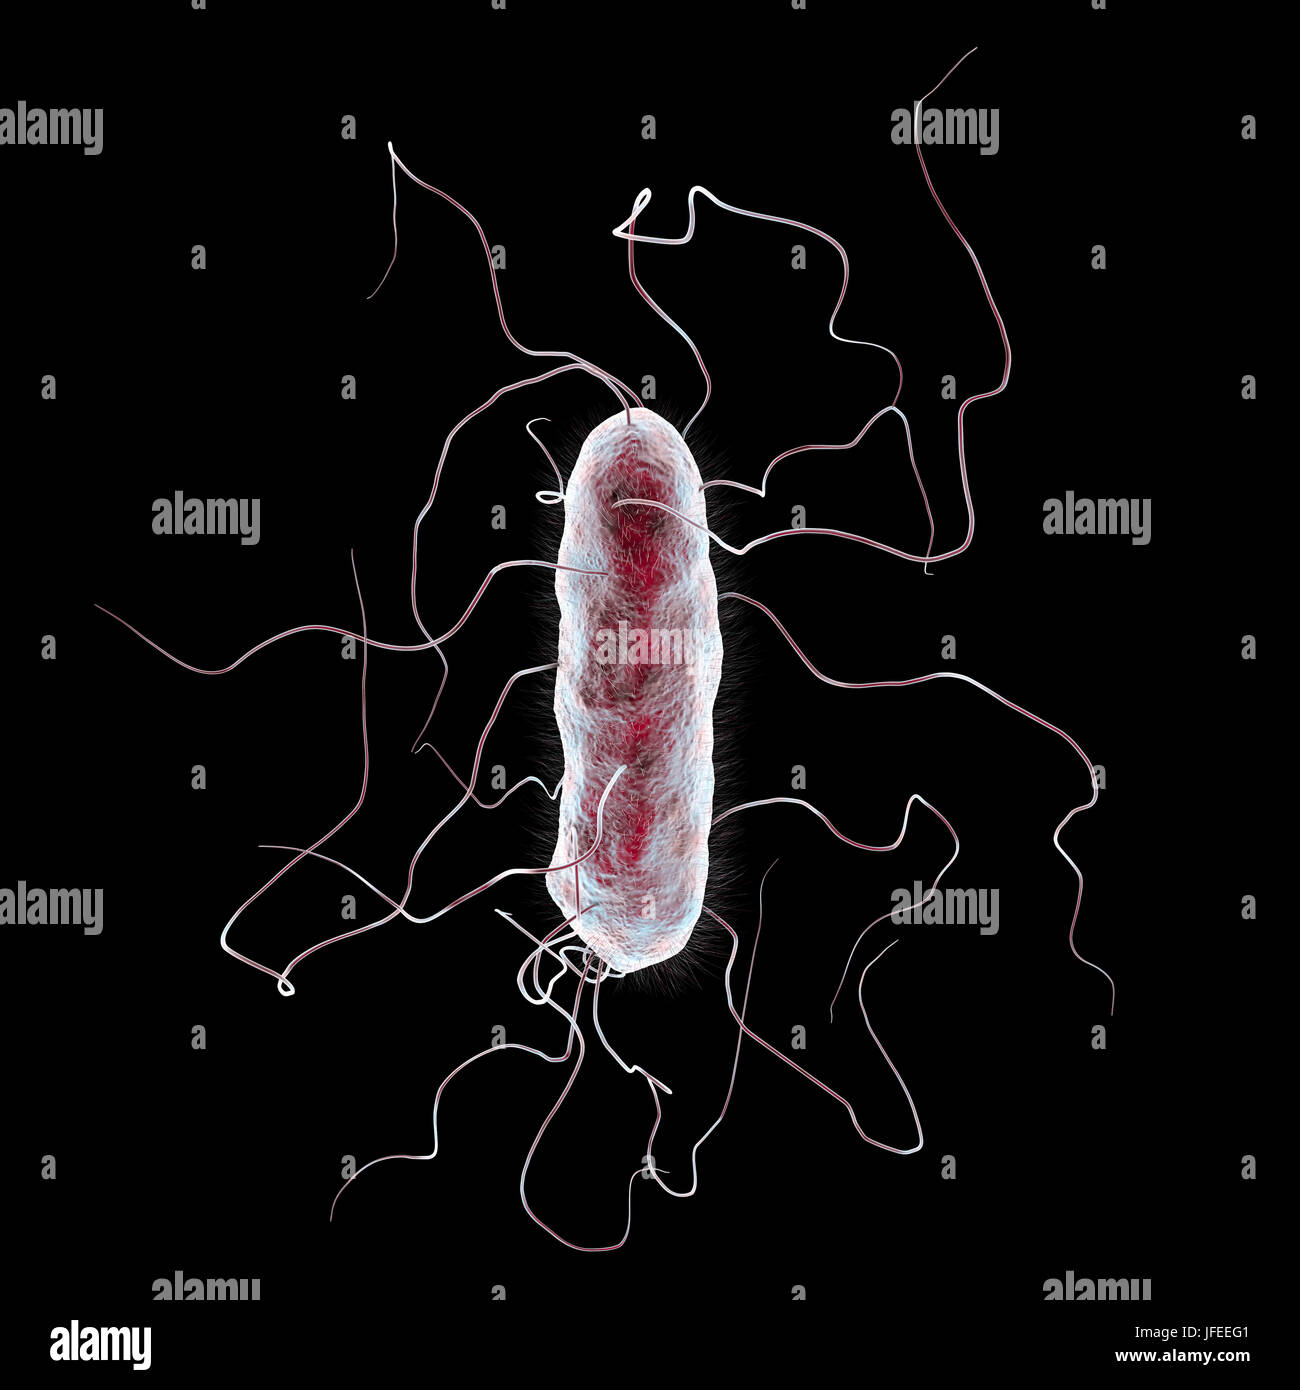 Proteus mirabilis bacterium, computer illustration. This is an enterobacterium which is present normally in the human intestine, although it has potential pathogenic qualities. Infections of the urinary tract are the most common diseases caused by P. mirabilis. Often such infections occur in hospitals as a secondary infection in debilitated patients. This gram-negative bacillus has flagella (hair-like structures) on its surface. The movement of the flagella gives the bacterium its mobility, enabling Proteus strains to spread rapidly. Stock Photo